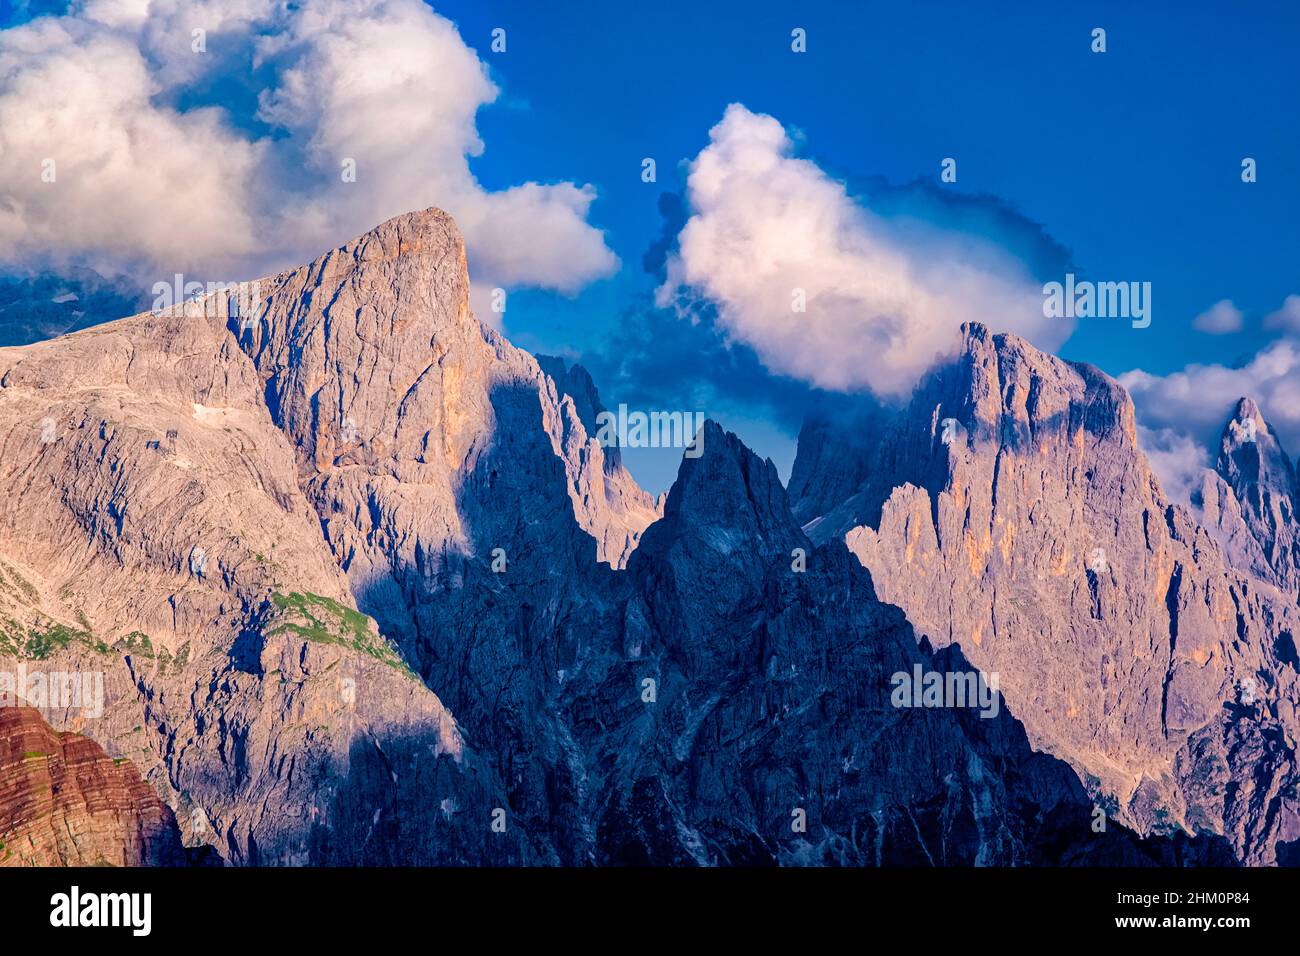 Cima della Rosetta and Cima di Val di Roda, two of the main summits of the southern Pala group, partly covered in clouds, at sunset. Stock Photo